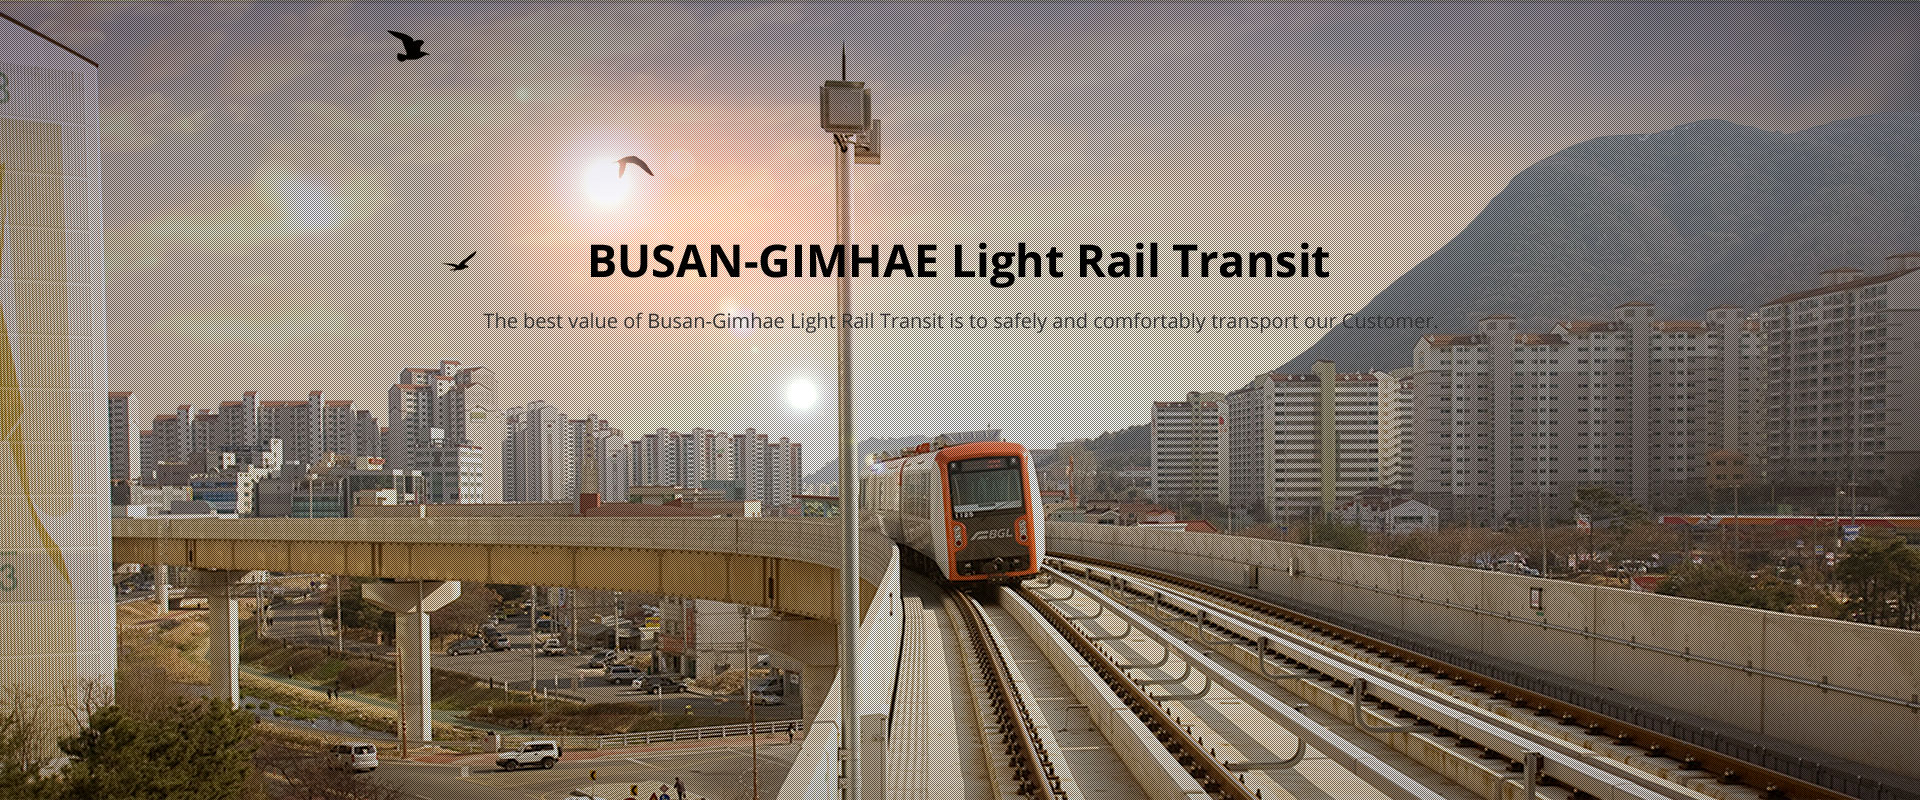 BUSAN-GIMHAE Light Rail Transit. The best value of Busan-Gimhae Light Rail Transit is to safely and comfortably transport our Customer.